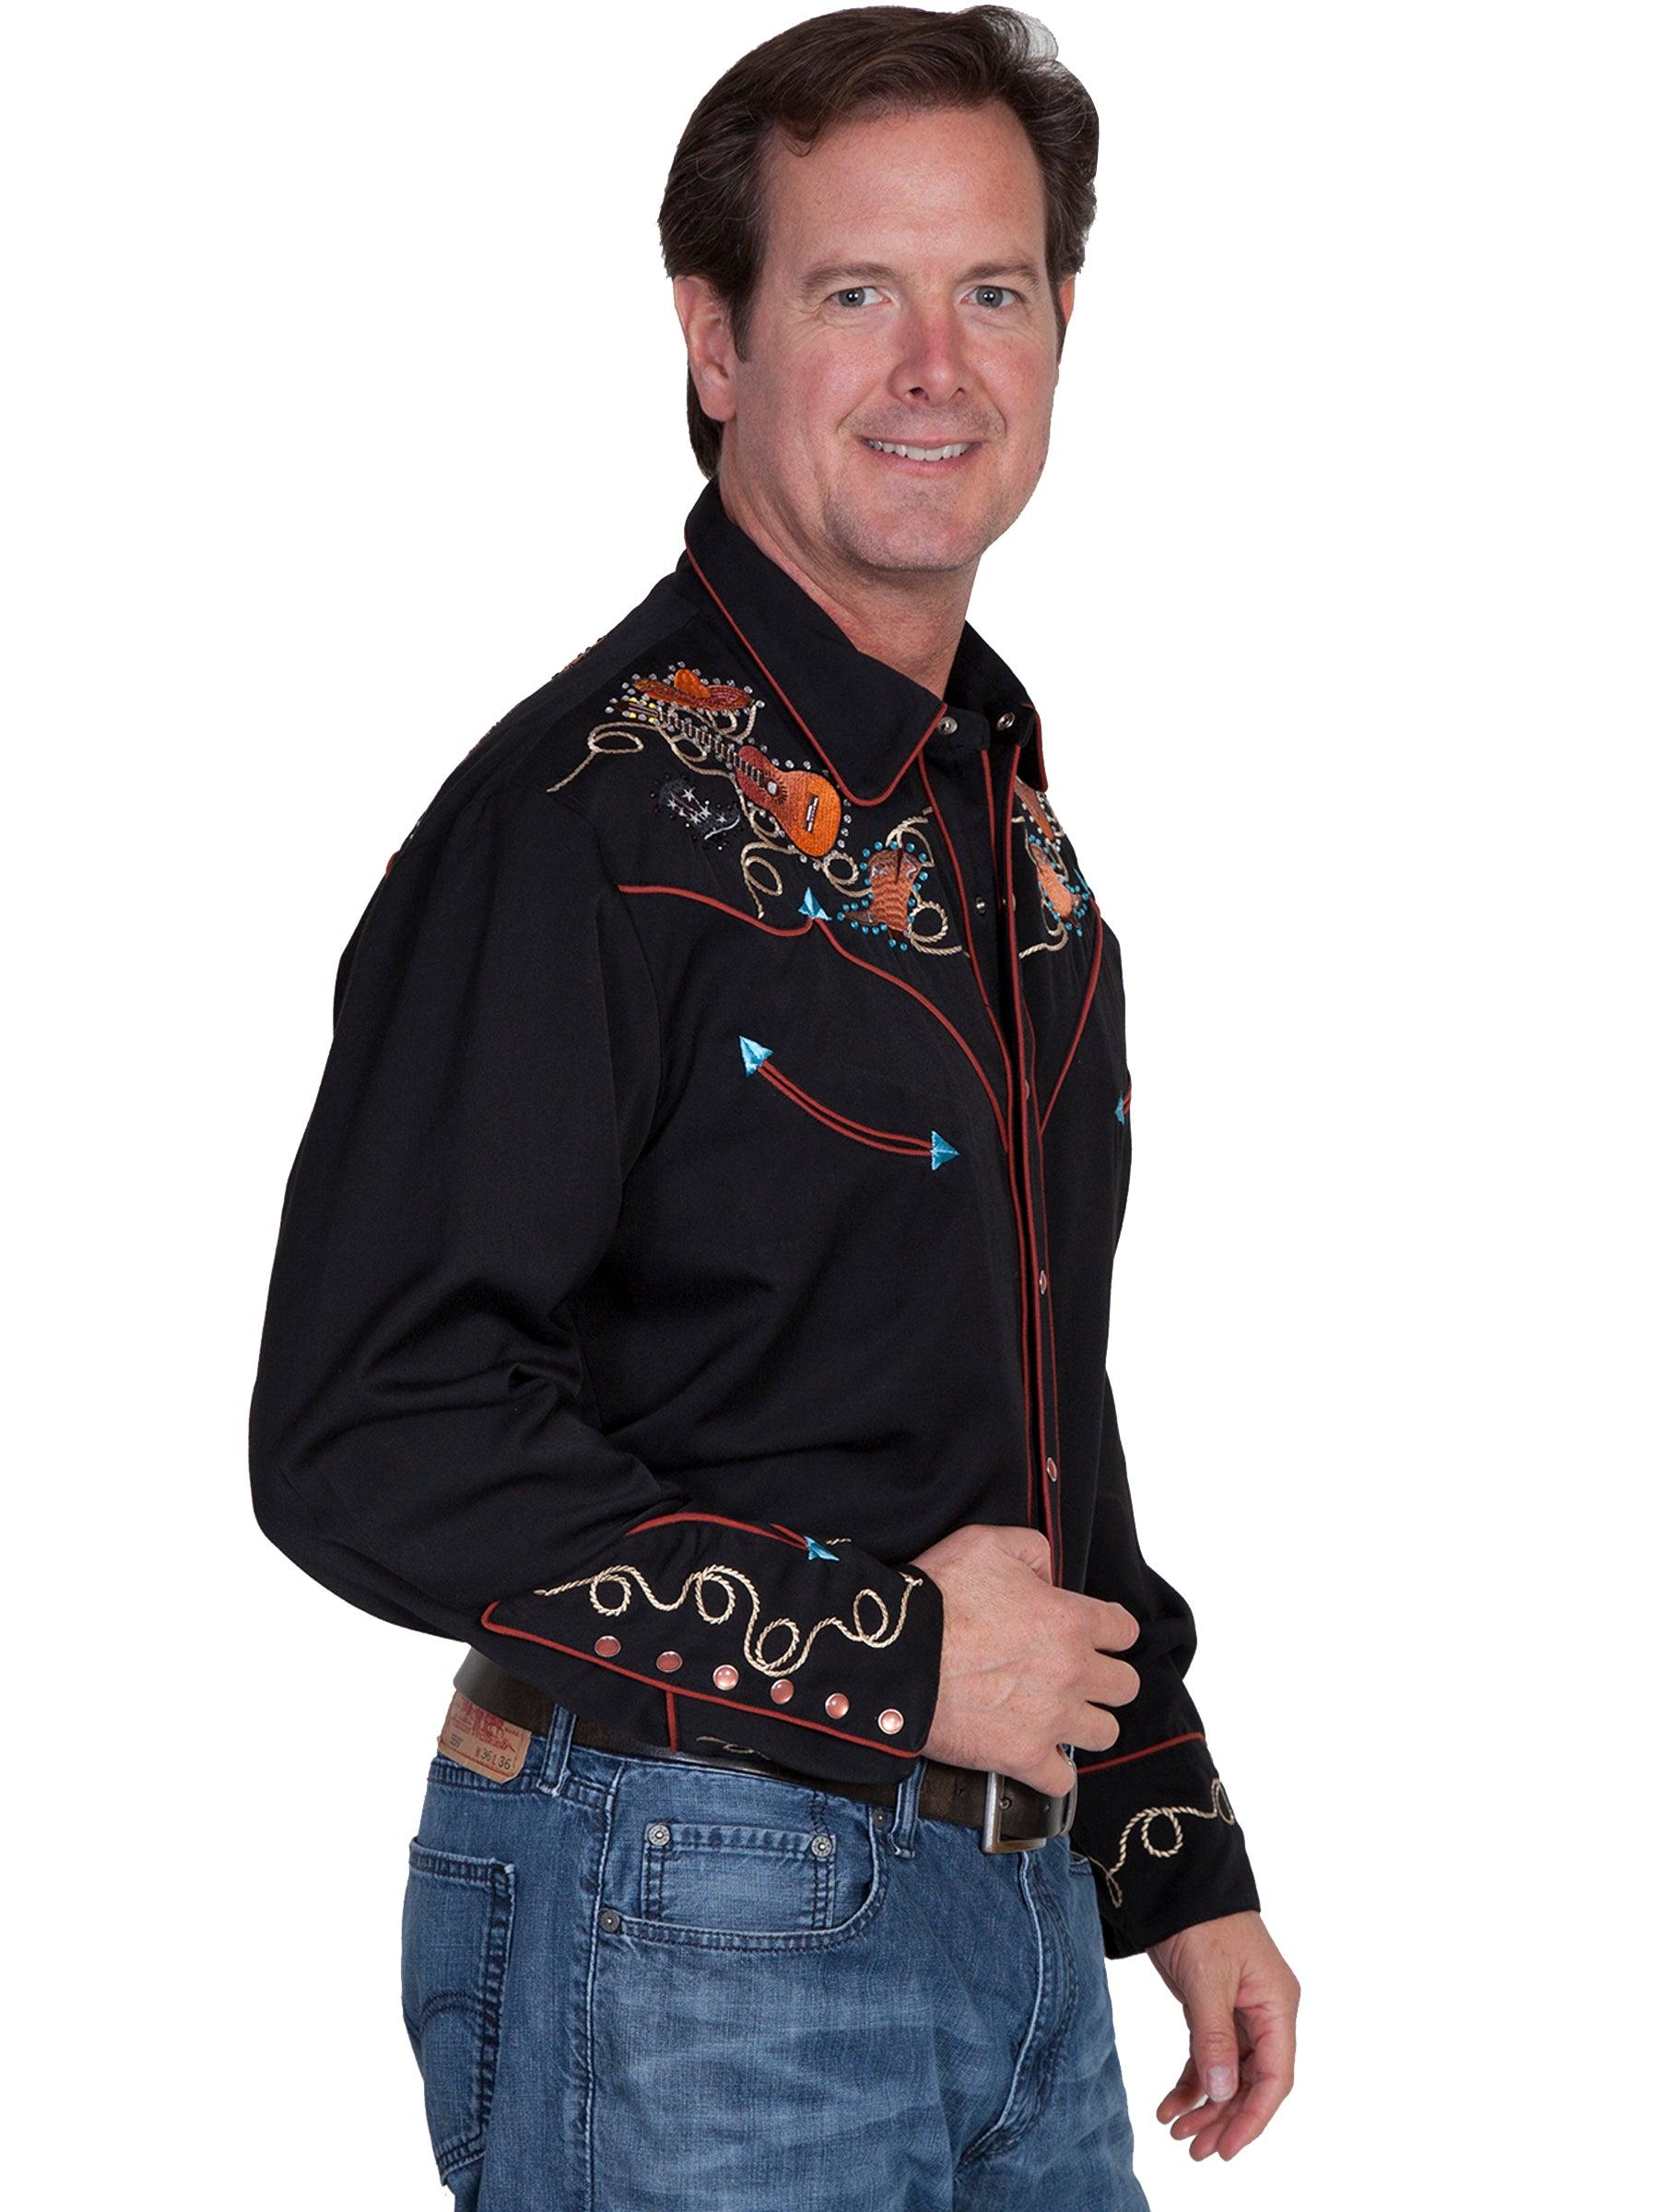 Scully BLACK BOOTS HATS GUITARS EMBROIDERED SHIRT - Flyclothing LLC